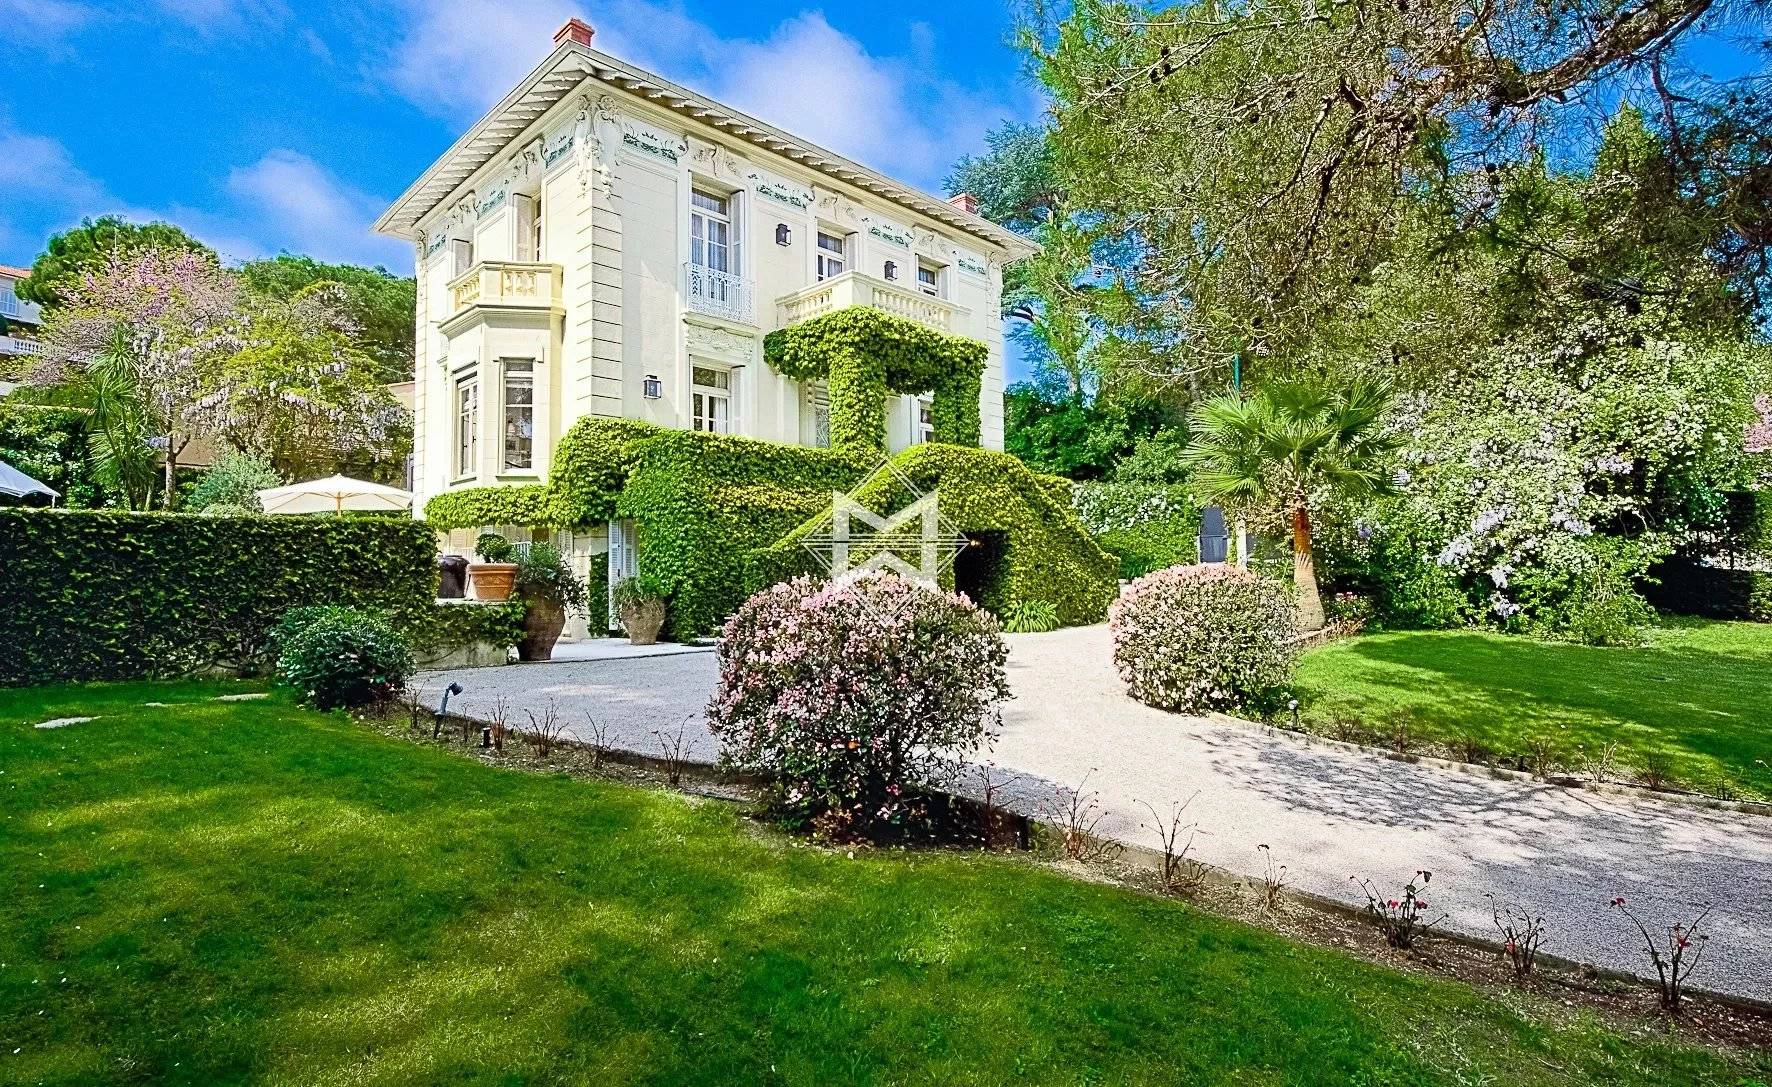 Magnificent Belle Epoque property entirely renovated